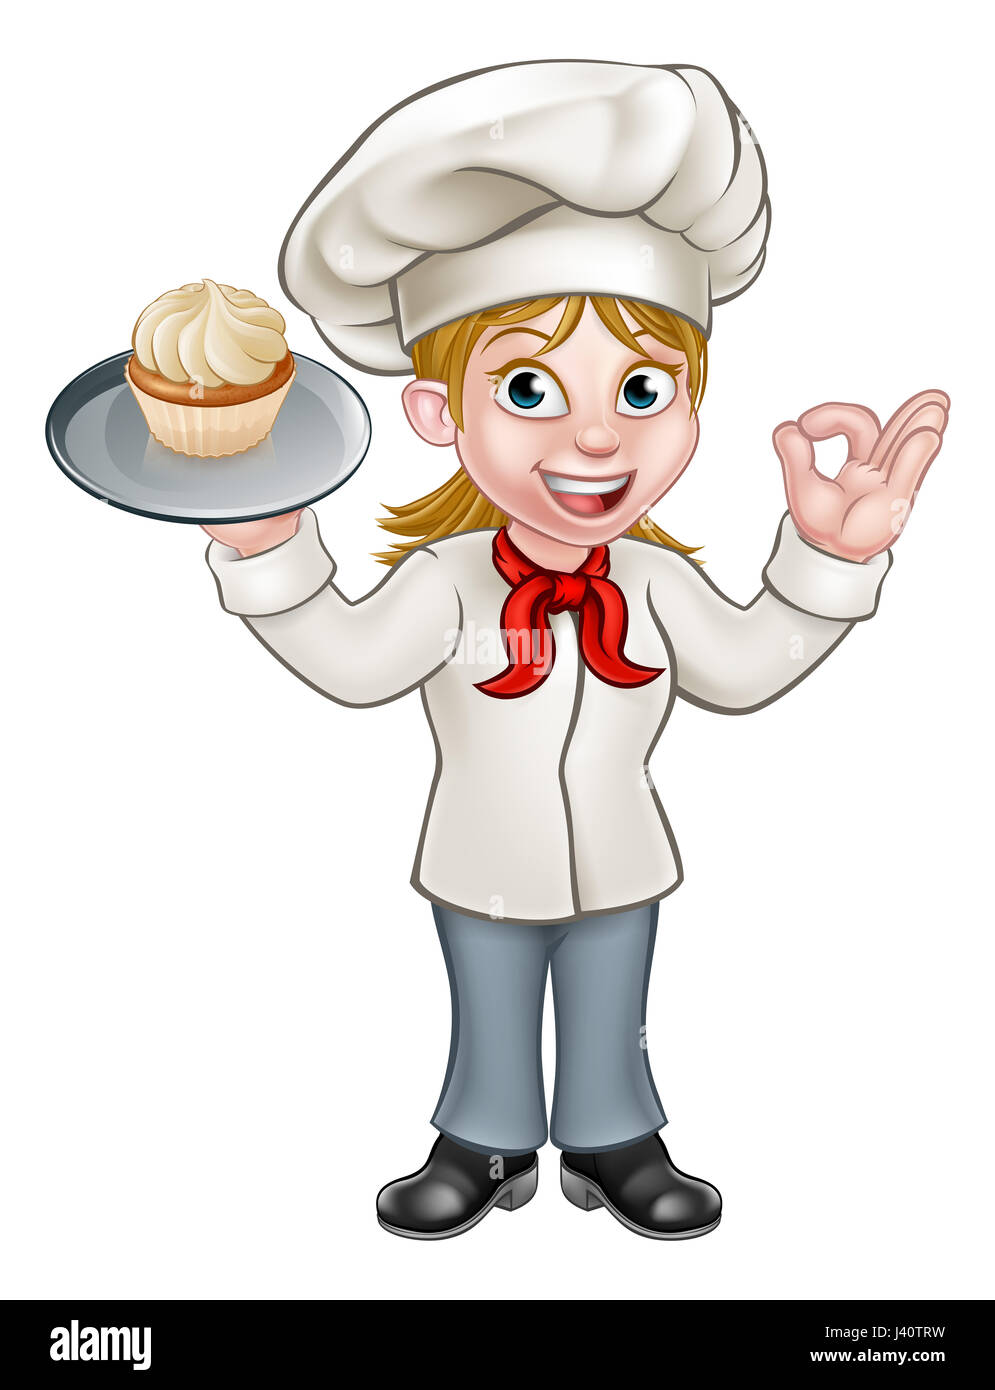 A cartoon woman pastry chef or baker character holding a plate with a cupcake or fairy cake on it Stock Photo